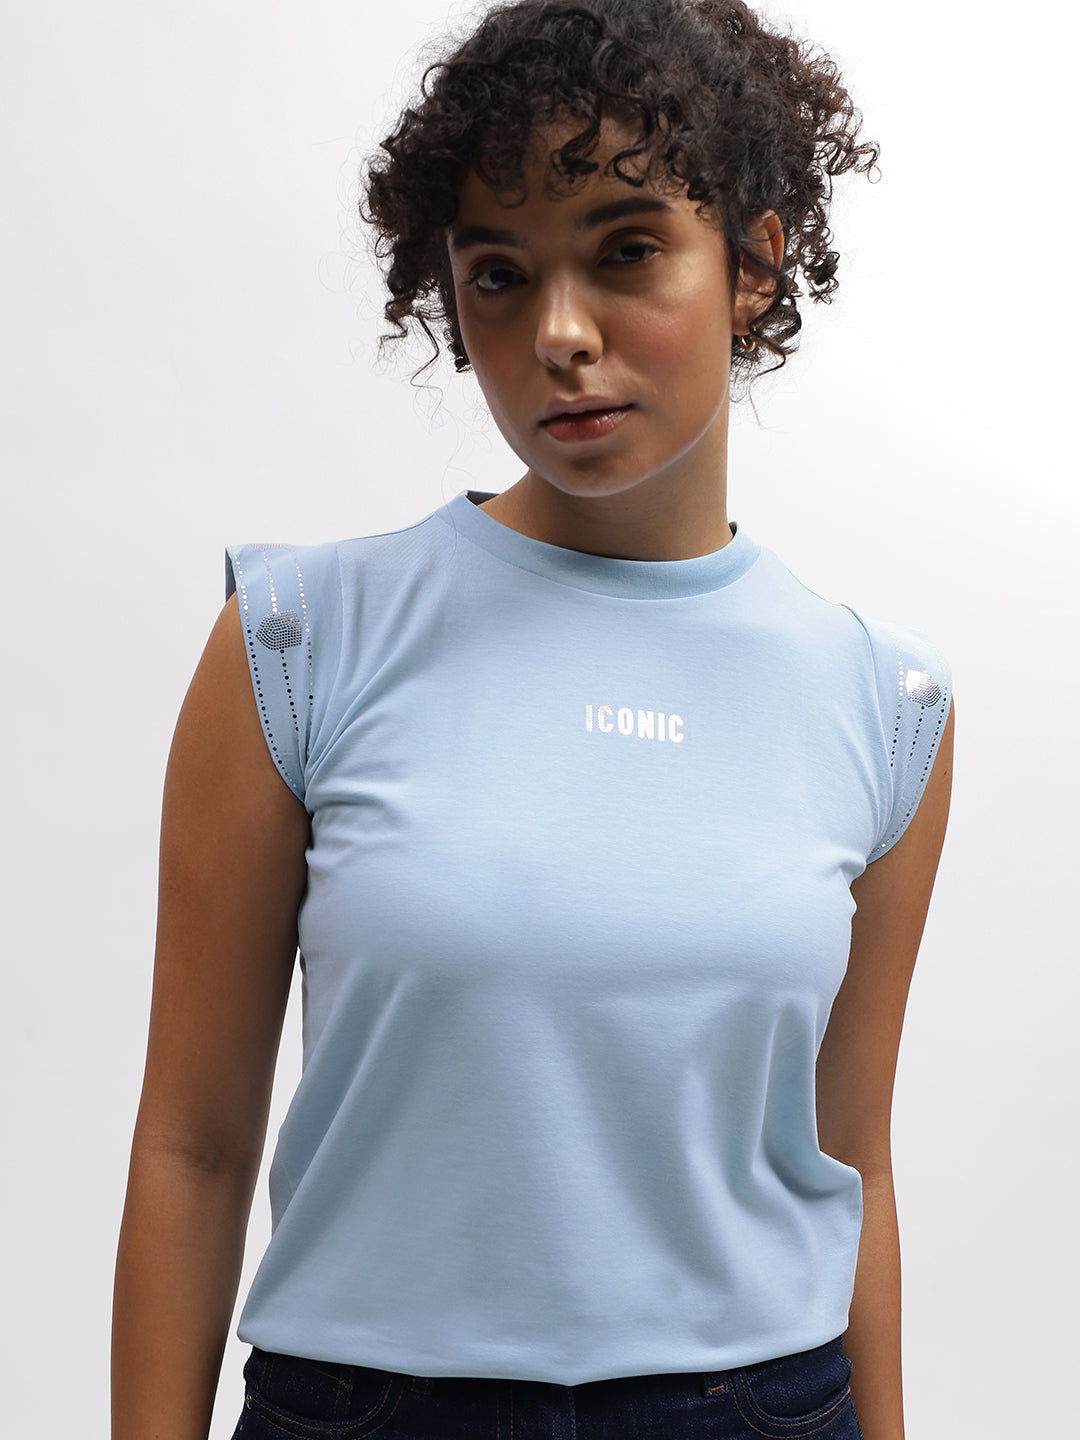 Iconic Women Blue Solid Round Neck Short Sleeves T-Shirt